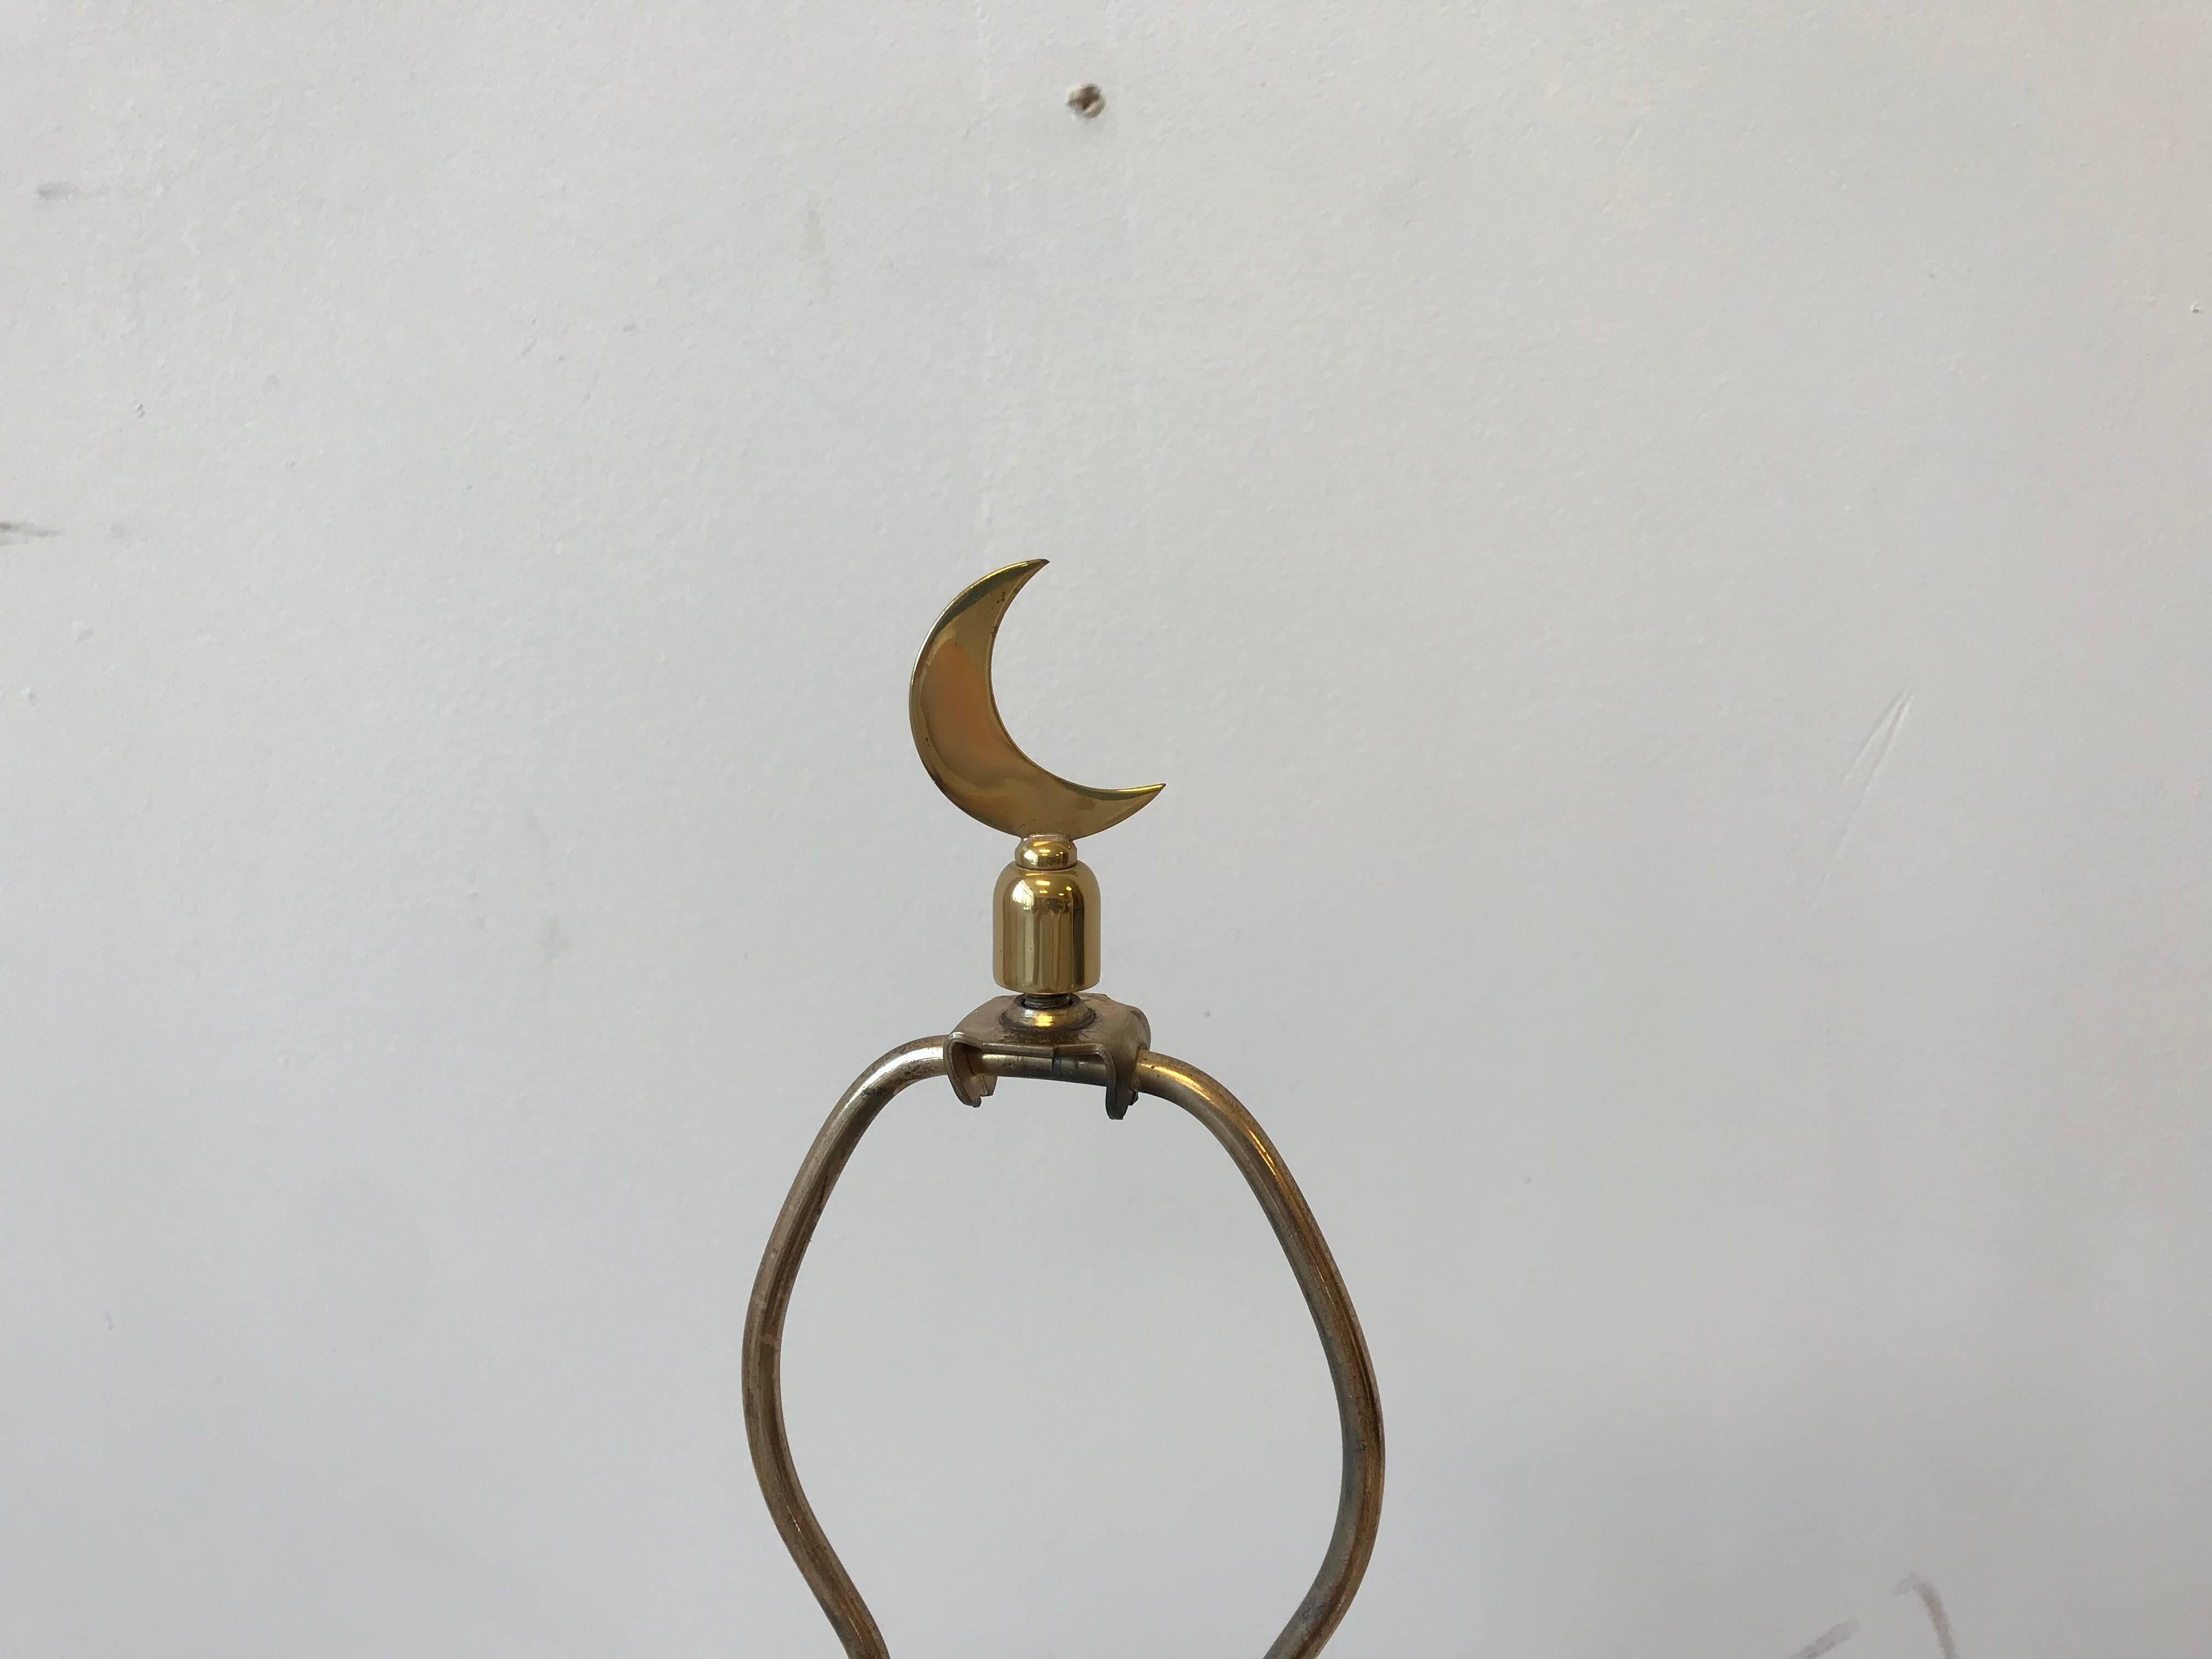 Offered is an exquisite, 1970s Italian brass lamp with a star-shaped base and crescent moon finial. 

Measure: 22.5" from base to socket. US wiring.